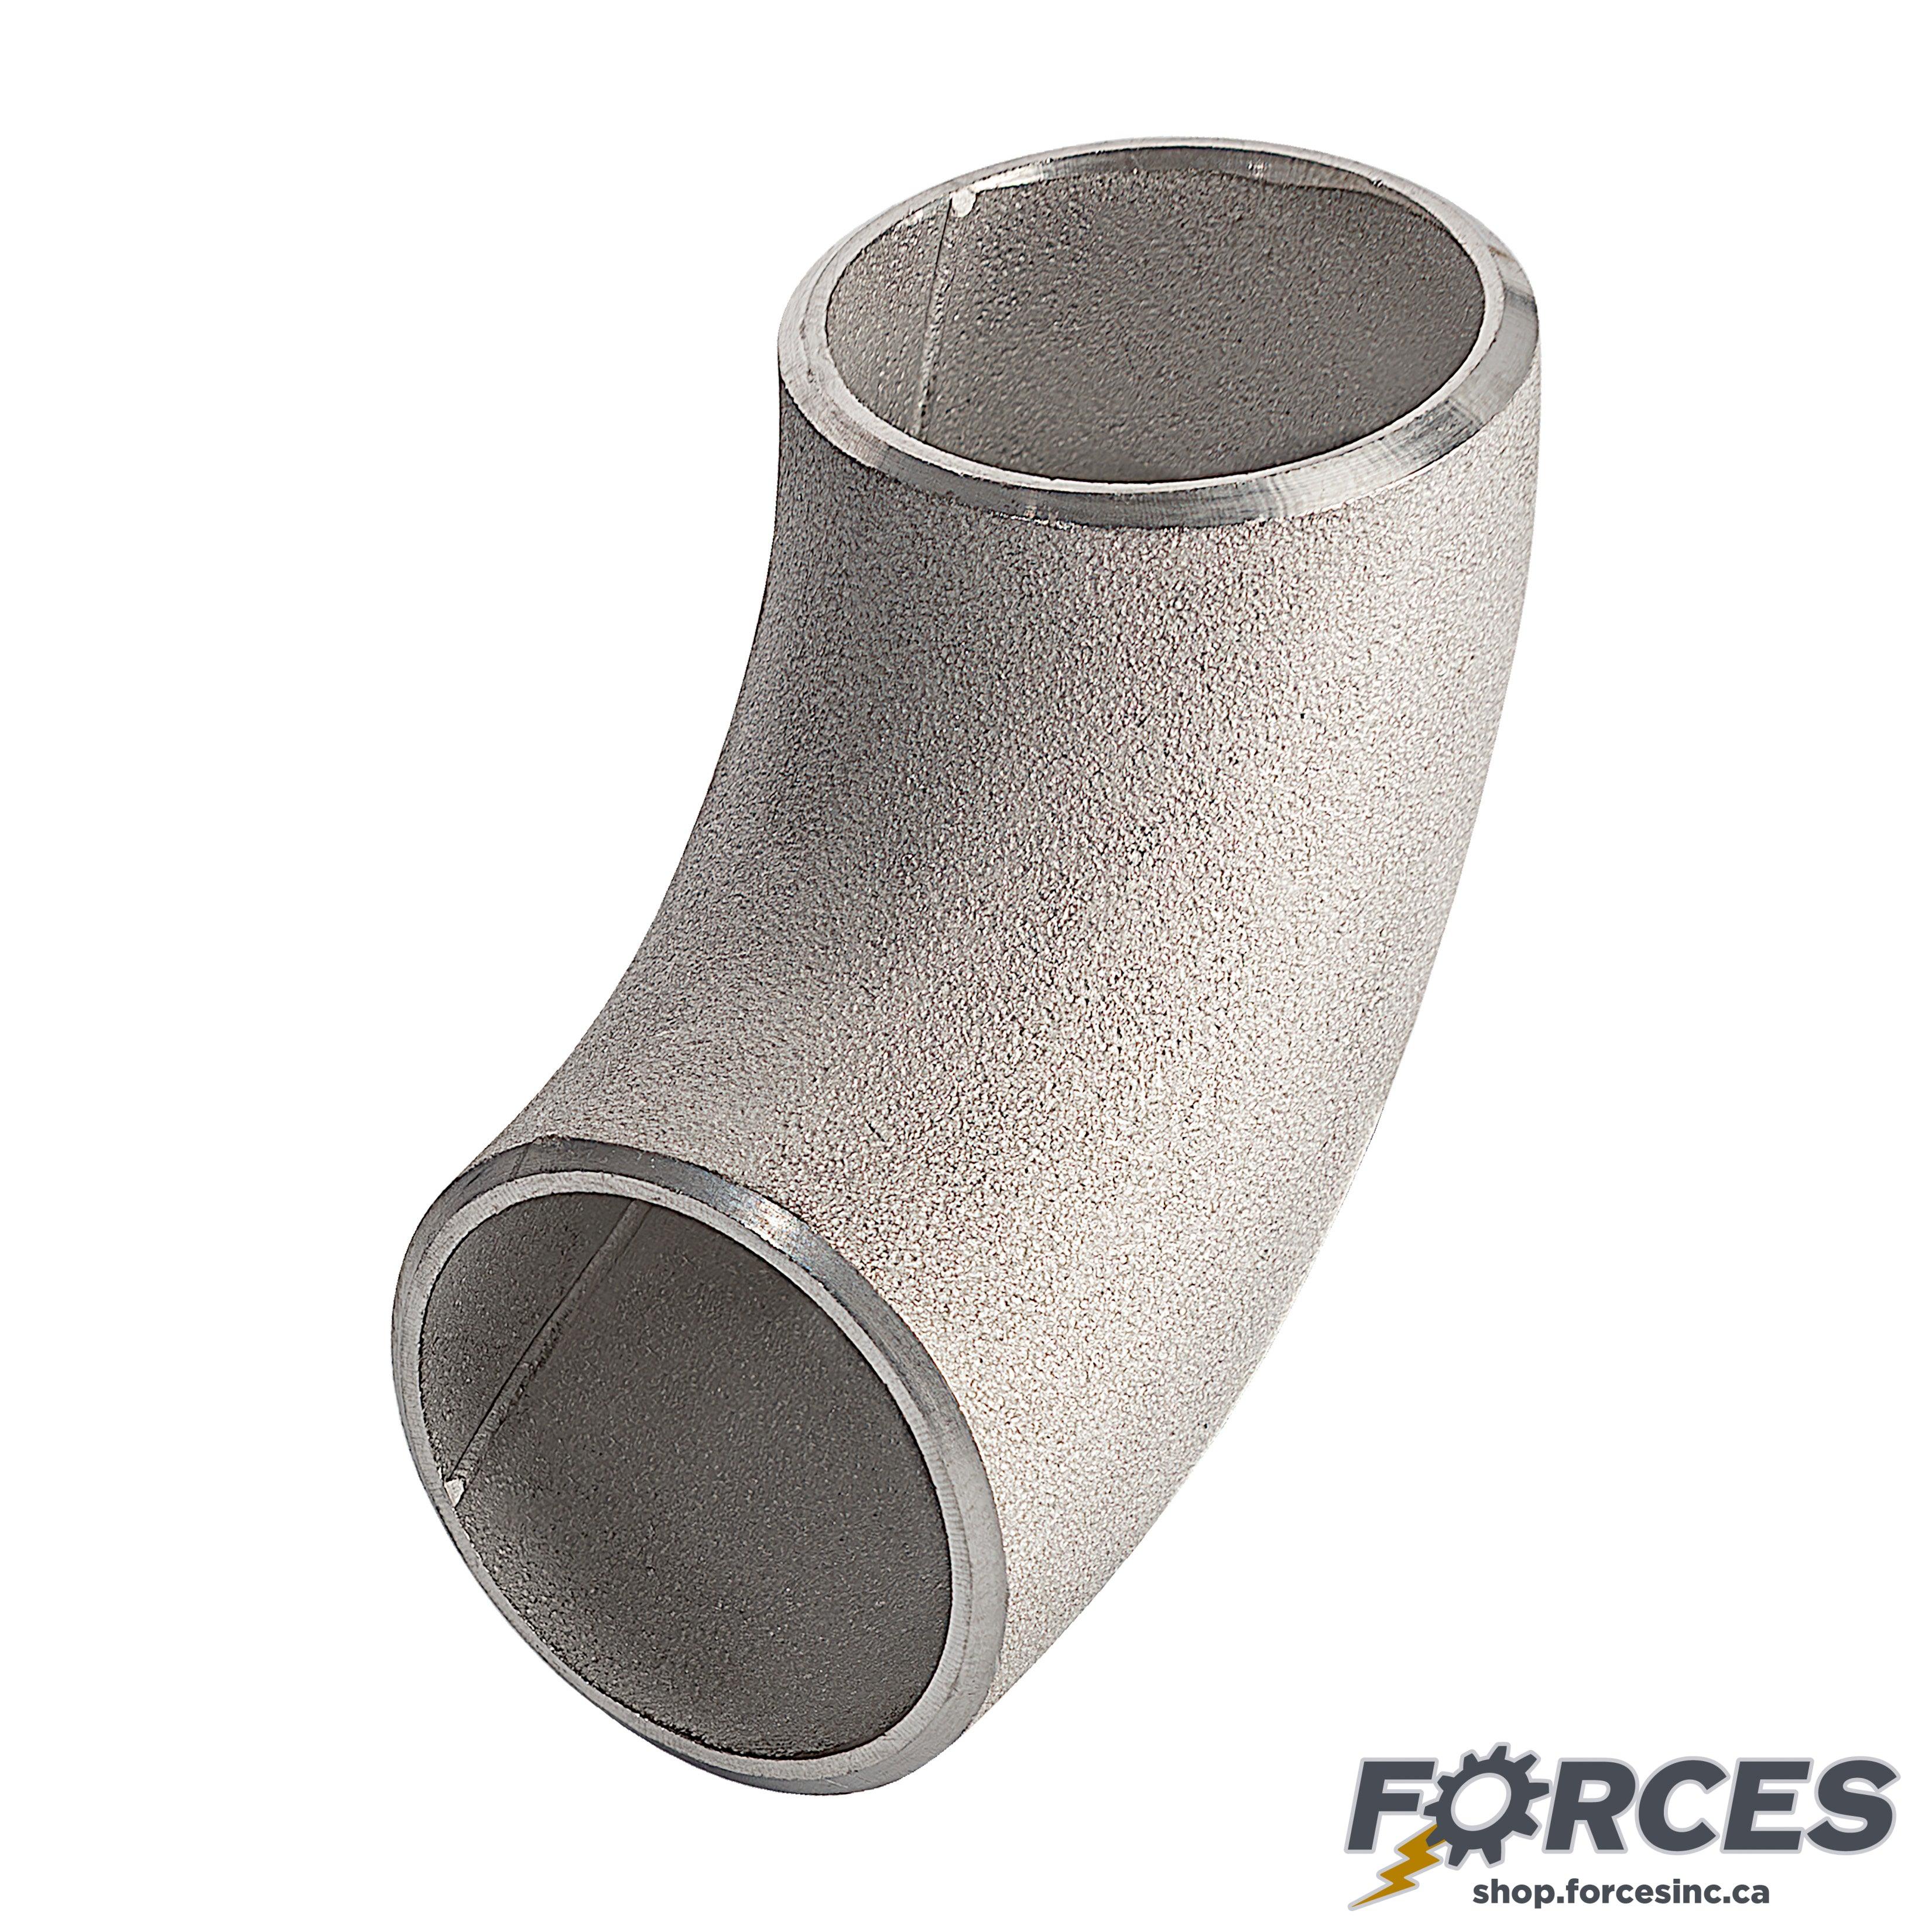 1-1/4" Elbow 90° SCH 40 Butt Weld - Stainless Steel 316 - Forces Inc